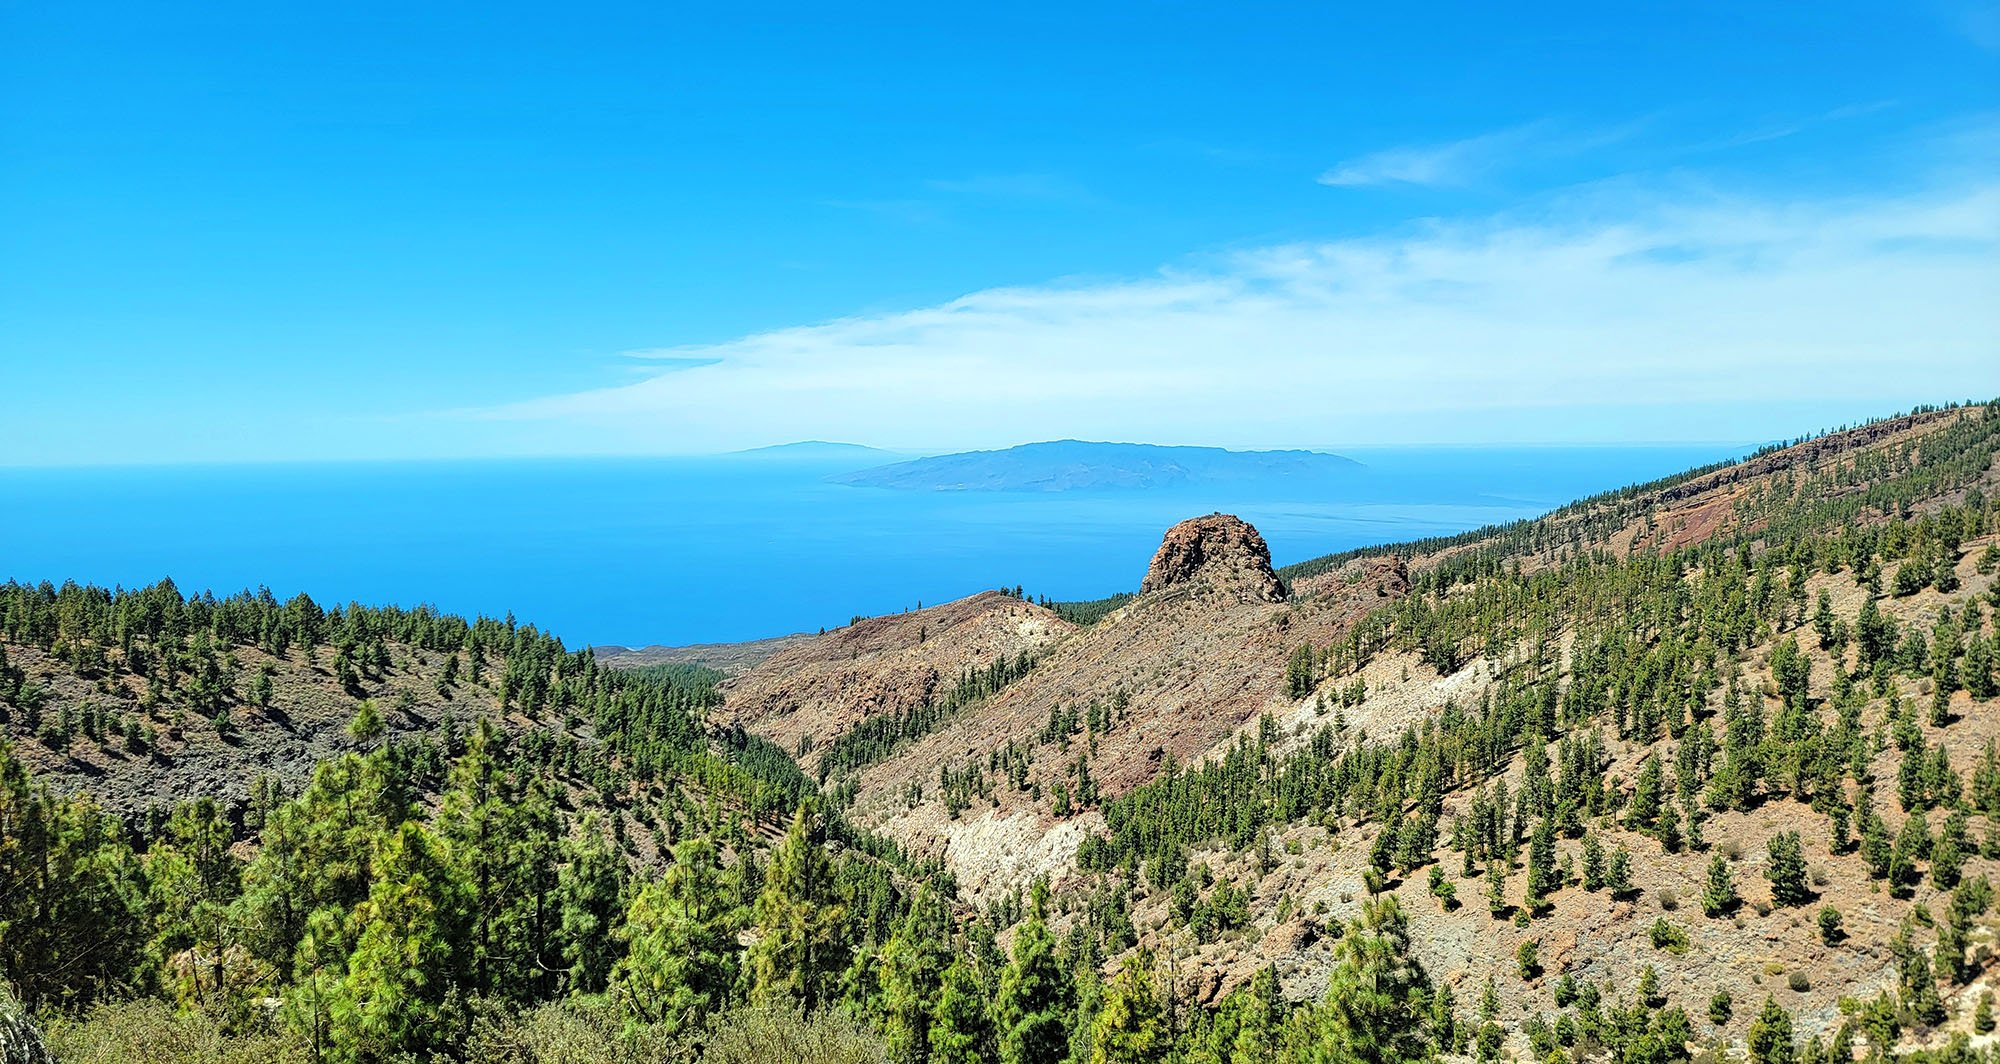 La Gomera and El Hierro seen from the north lip of the crater ( bout 2300m elevation )